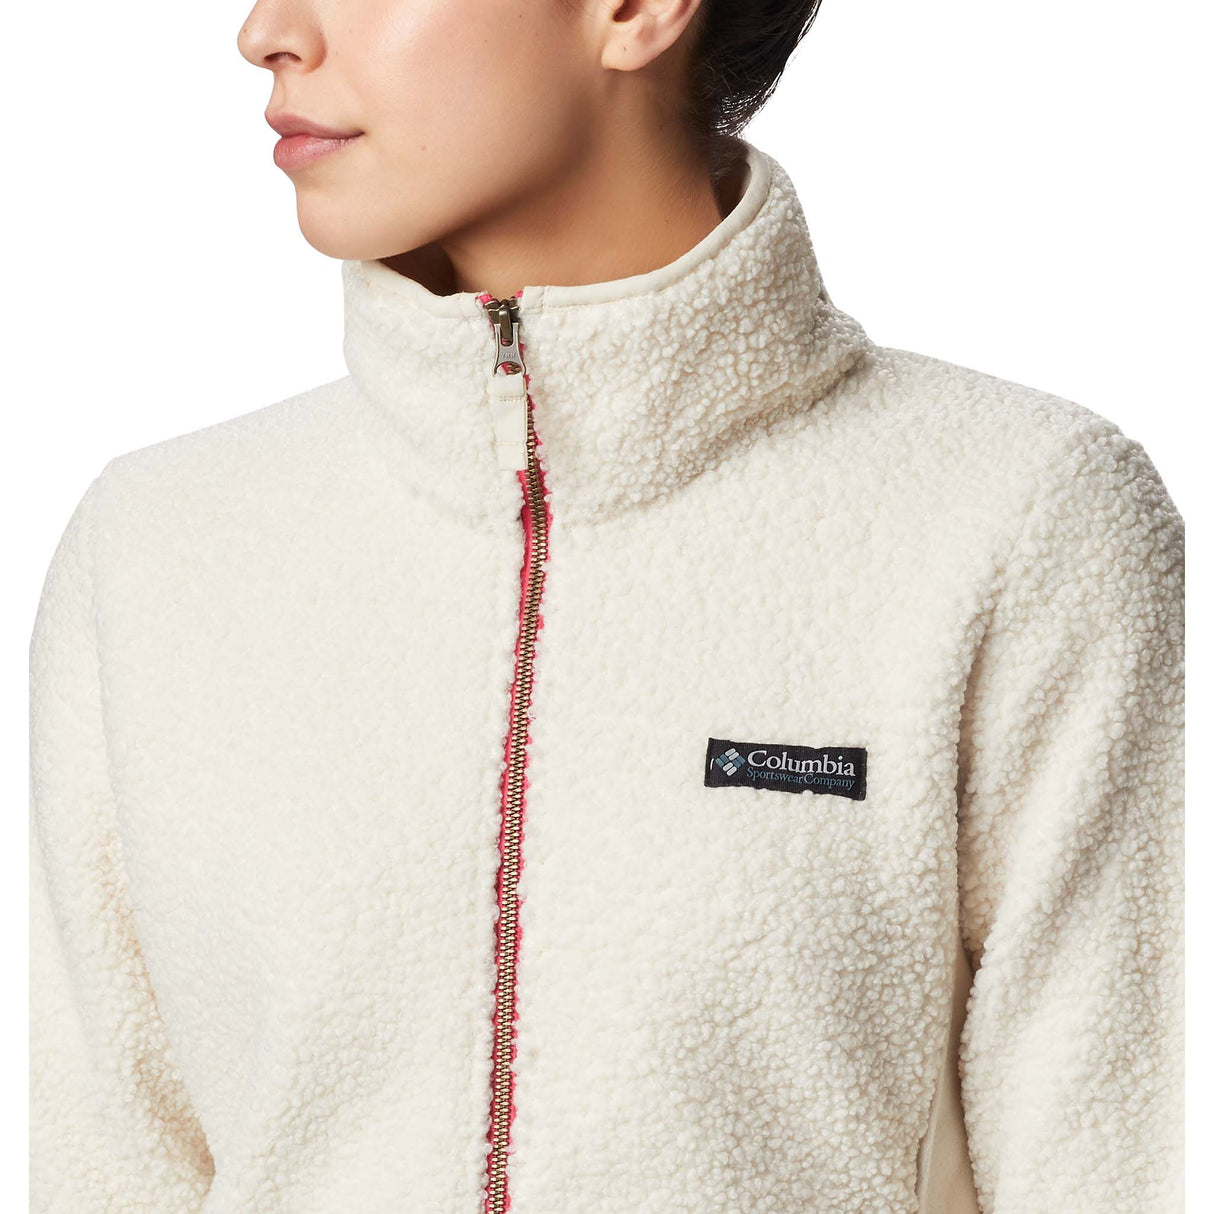 Columbia Panorama Full-Zip chandail laine polaire blanc pour femme detail